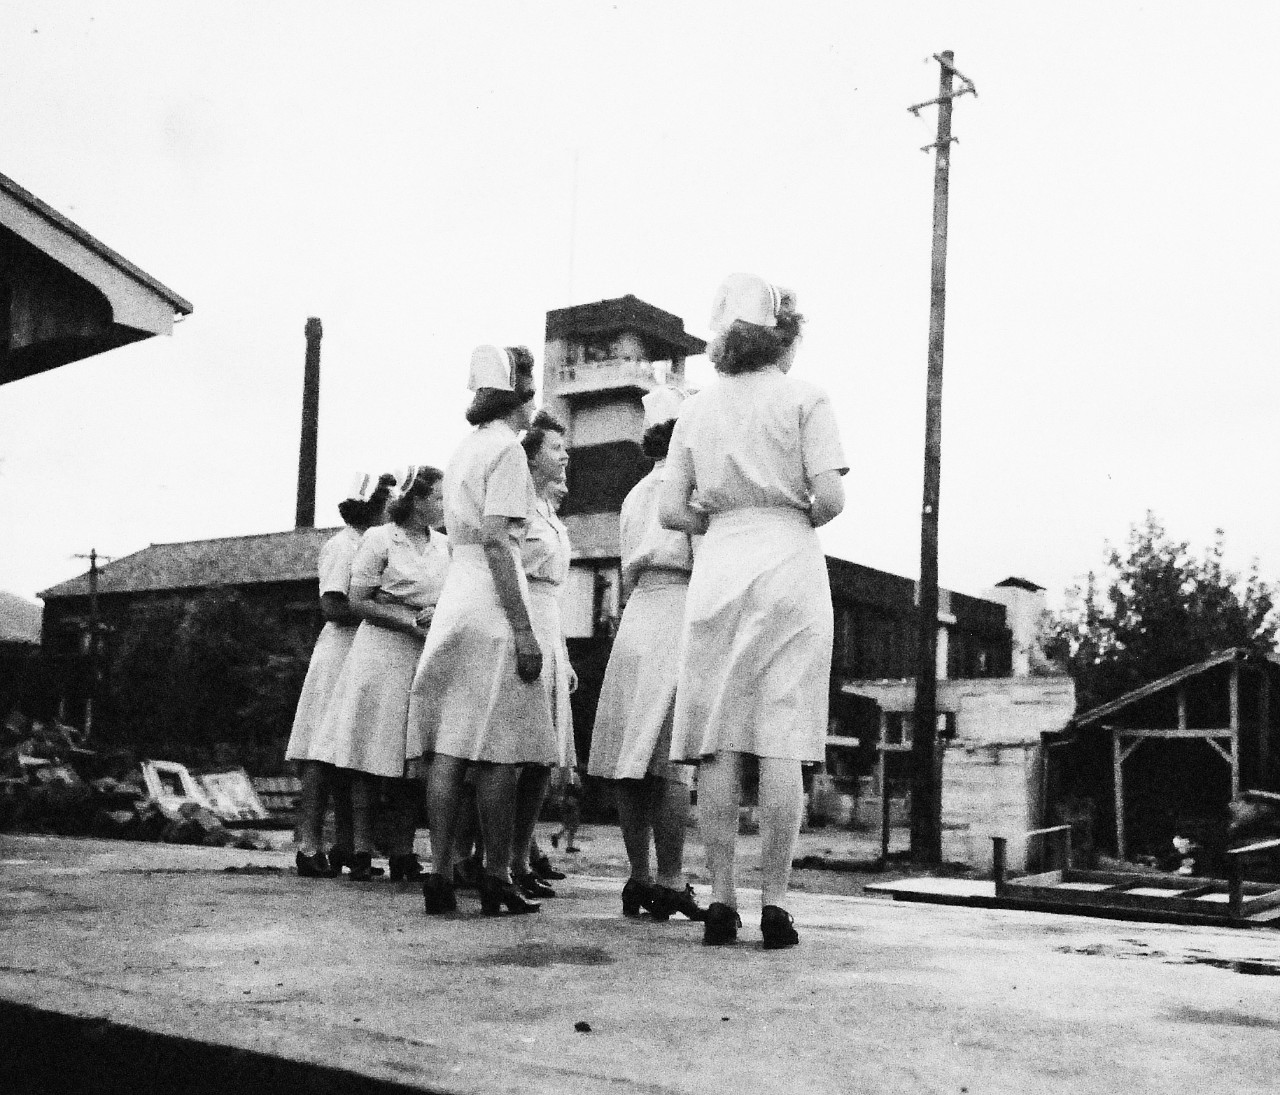 80-G-346550:   Prisoners of War, 1945.    U.S. Navy Nurses from USS Haven (AH-12) wait at the railroad station Nagasaki, Kyushu, Japan, for the first liberated Prisoners of War to arrive from Koyagi Island Prison Camp.  In the background is the customs house.  Photographed by crew of USS Chenango (CVE-28), September 13, 1945.  Official U.S. Navy photograph, now in the collection of the National Archives.  (2014/11/5).    Note, the original photograph is about 1” x 1” in size.   